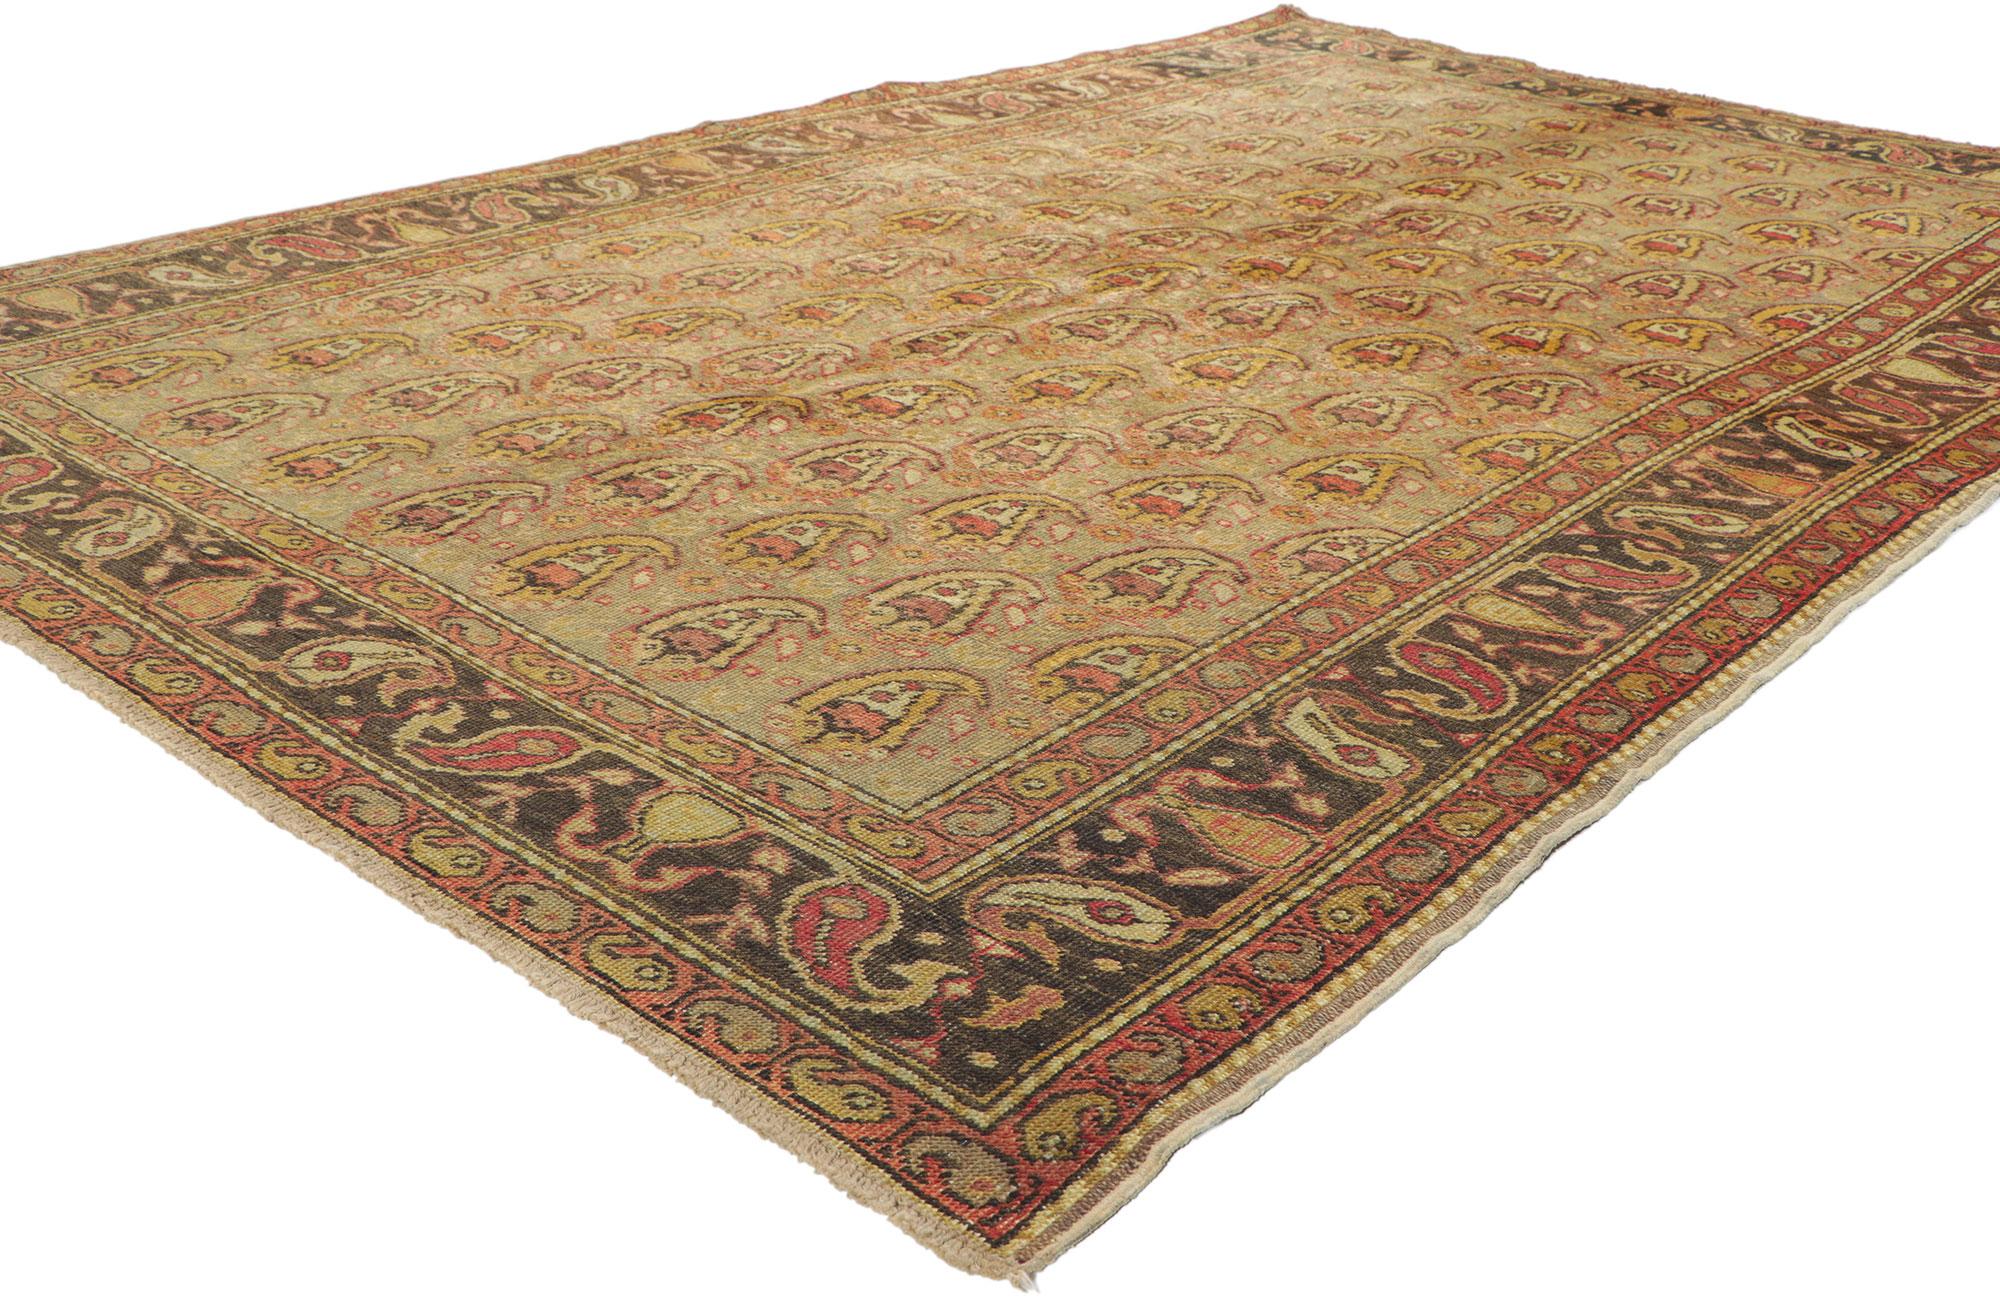 51393 Vintage Turkish Oushak Rug, 04'09 x 07'08.
Emanating timeless style with incredible detail and texture, this hand knotted wool vintage Turkish Oushak rug is a captivating vision of woven beauty. The allover botanial pattern and rustic